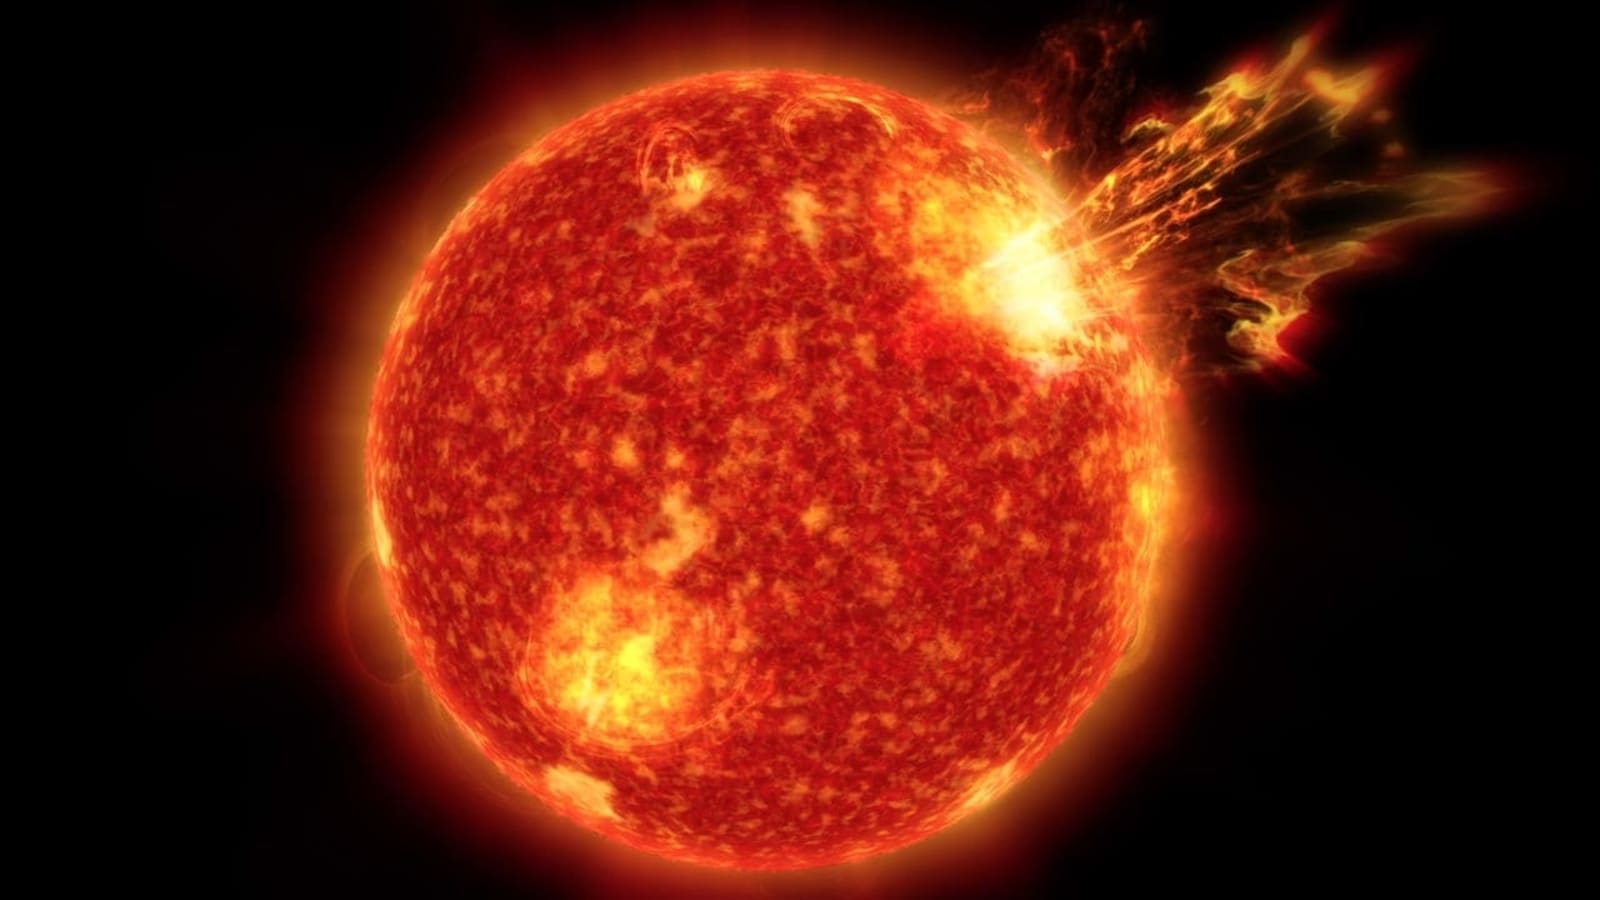 Solar storm watch: X-class solar flare impacts Earth, causing radio blackout over Pacific Ocean